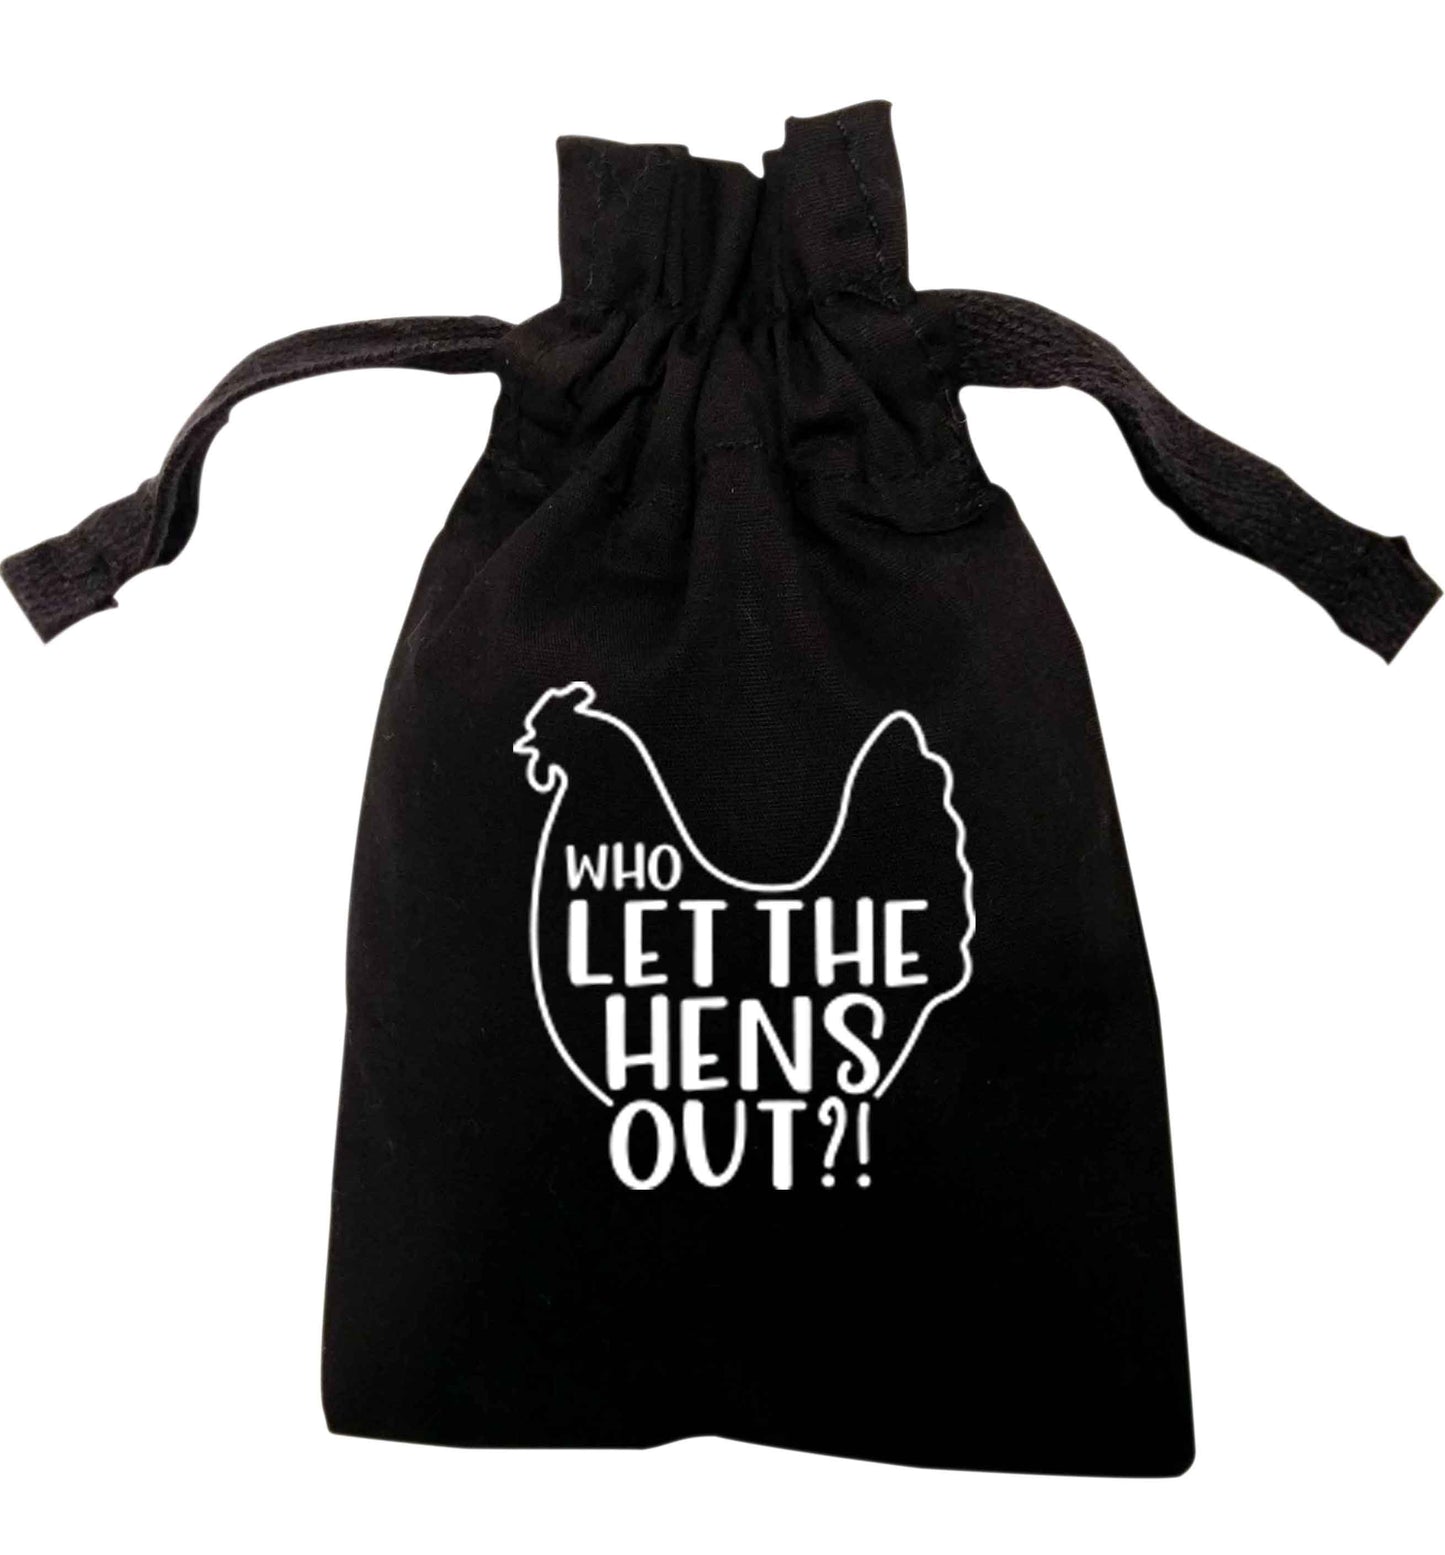 Who let the hens out | XS - L | Pouch / Drawstring bag / Sack | Organic Cotton | Bulk discounts available!